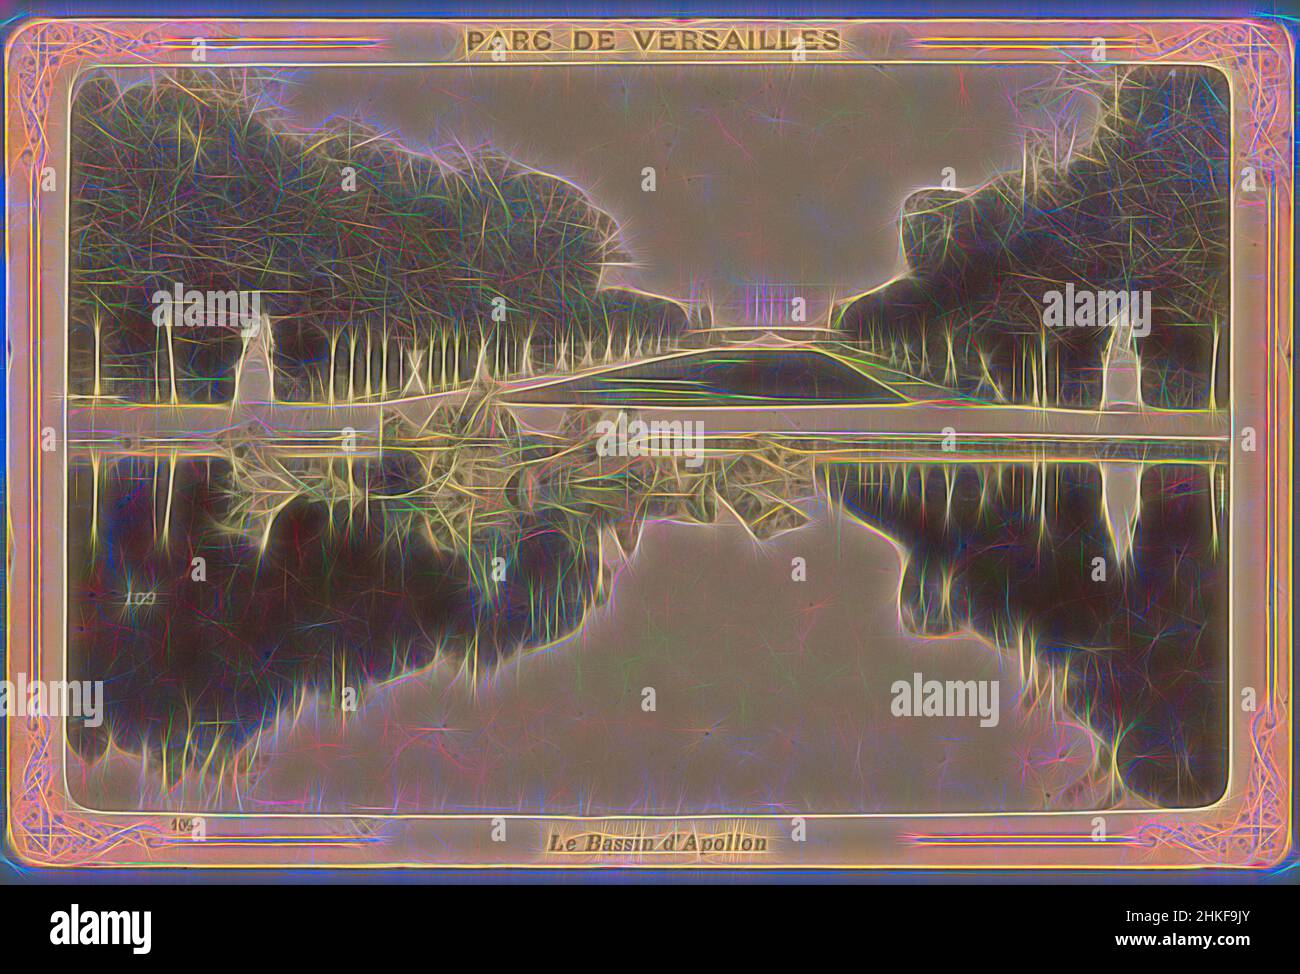 Inspired by View of the garden of Versailles with Le Bassin d'Apollon, Parc de Versailles, Le Bassin d'Apollon, Étienne Neurdein, Versailles, 1870 - 1900, albumen print, height 107 mm × width 163 mm, Reimagined by Artotop. Classic art reinvented with a modern twist. Design of warm cheerful glowing of brightness and light ray radiance. Photography inspired by surrealism and futurism, embracing dynamic energy of modern technology, movement, speed and revolutionize culture Stock Photo